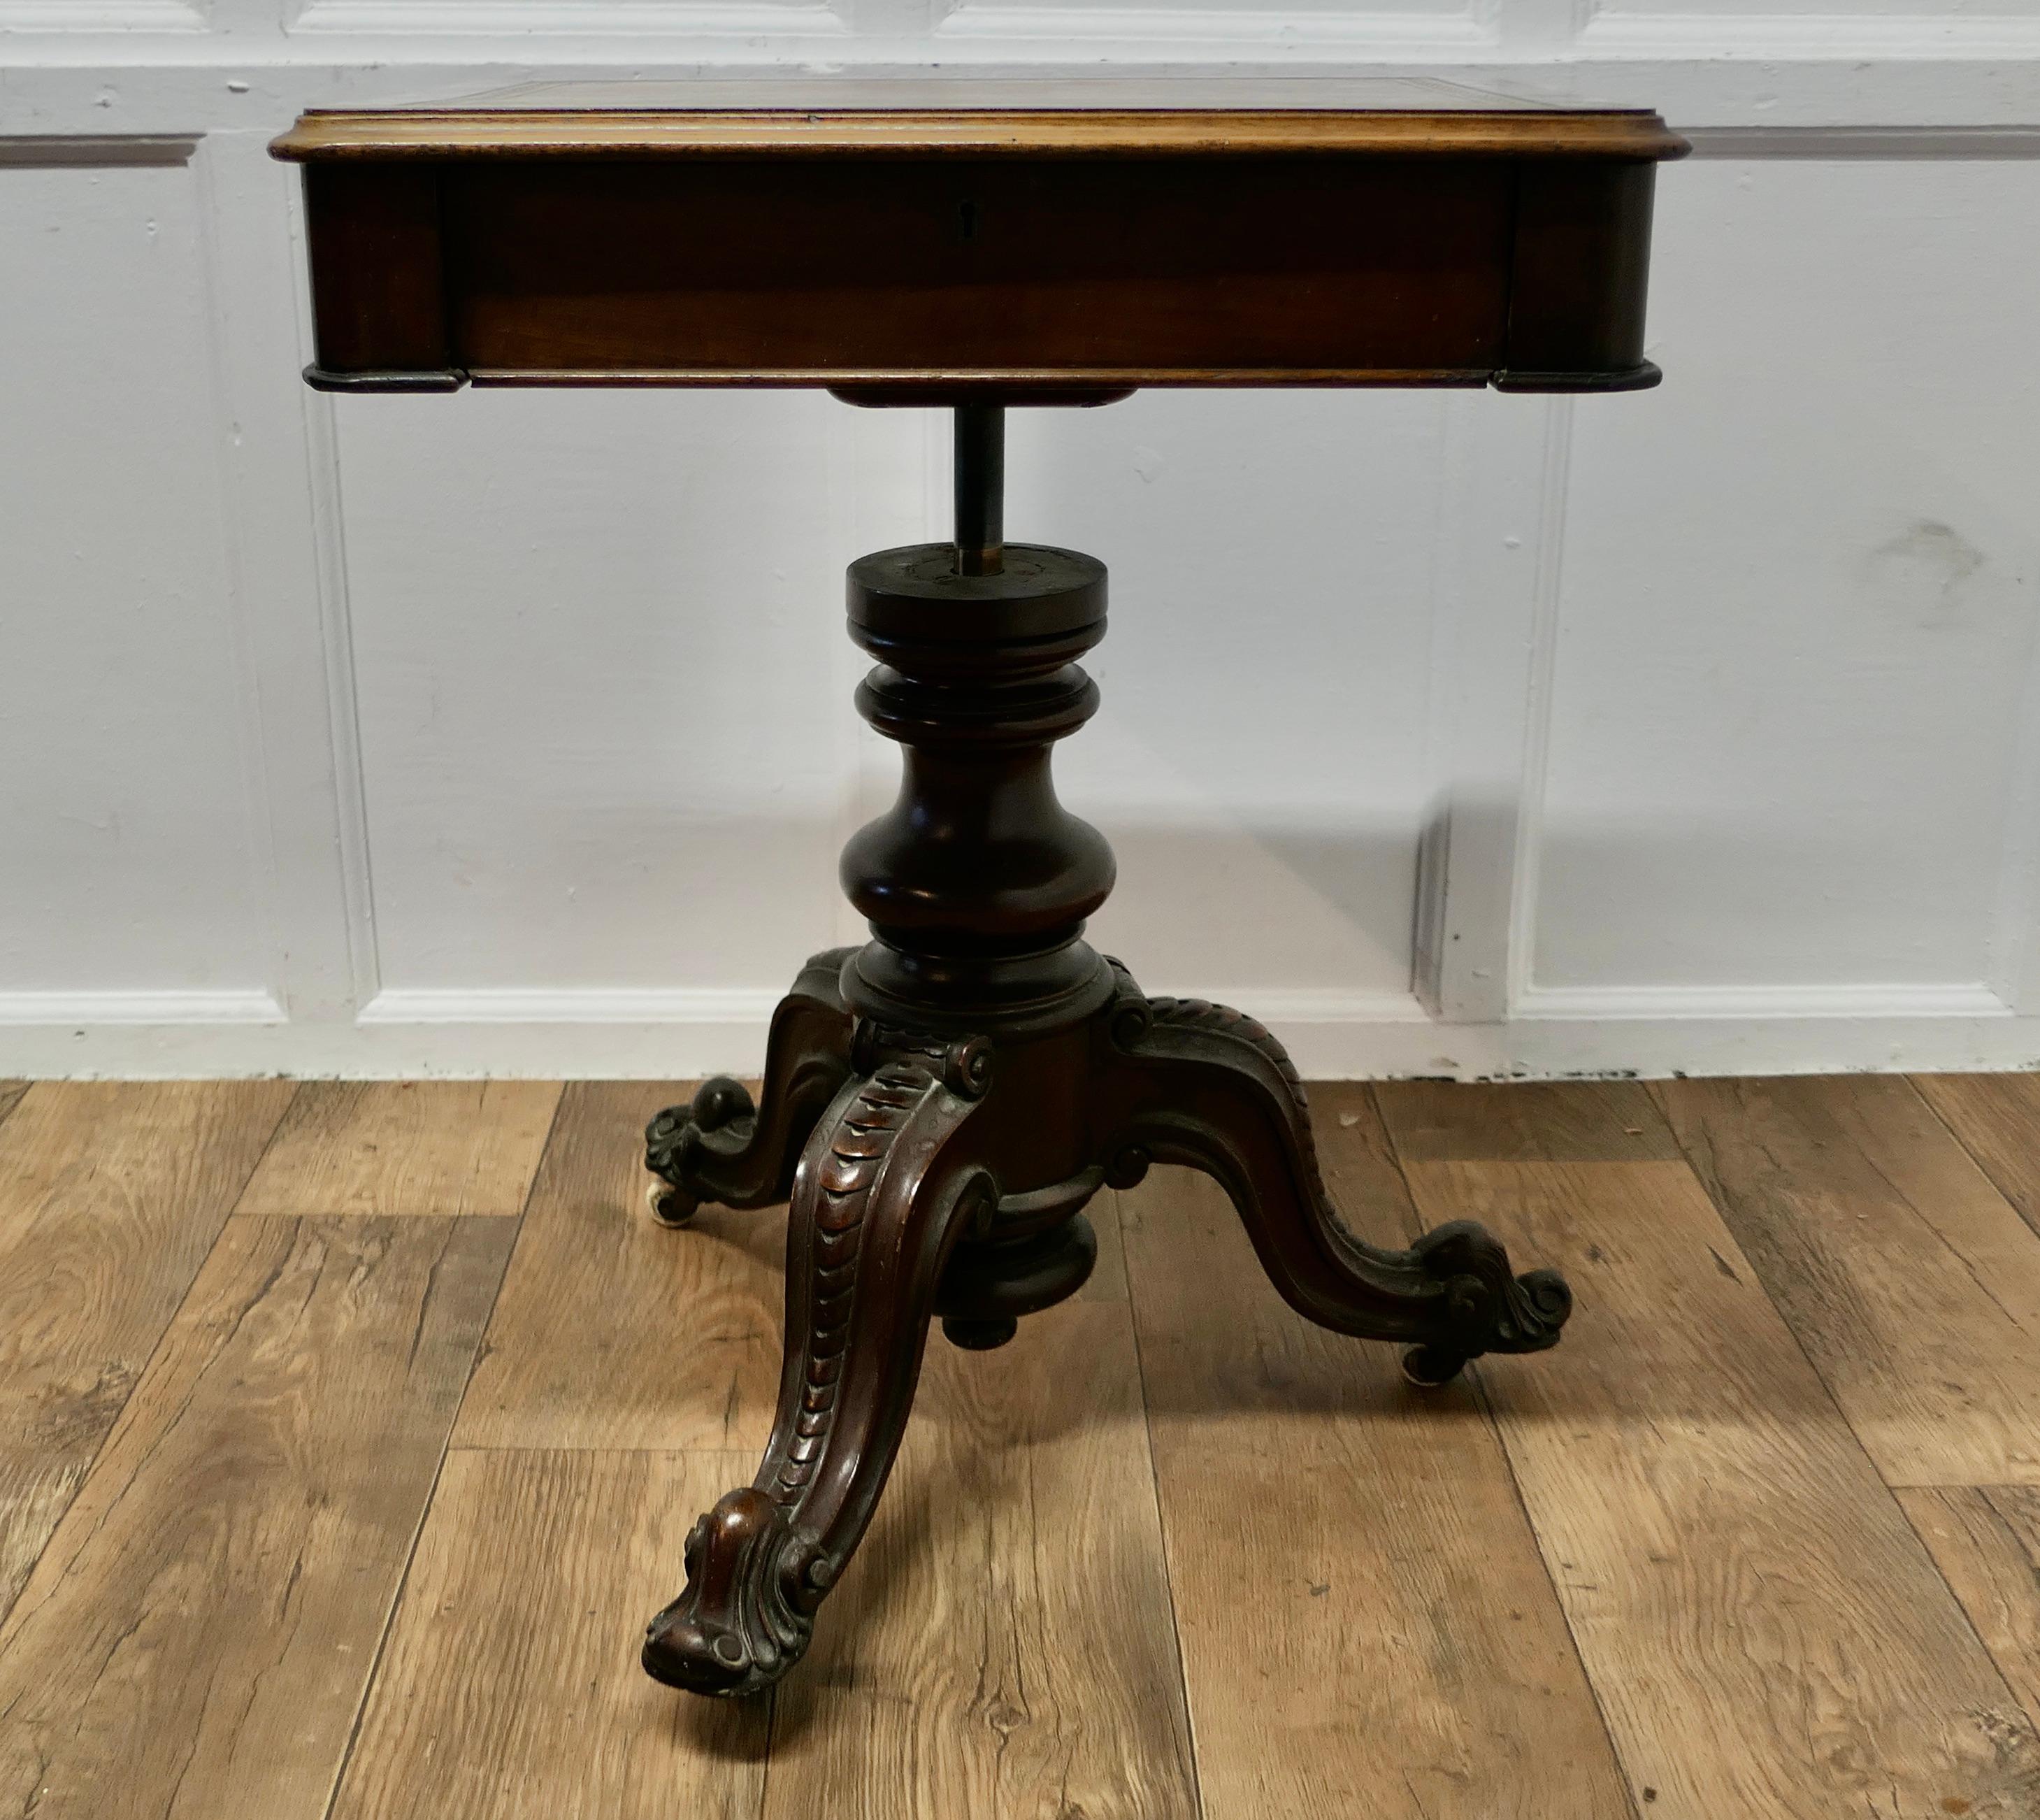 Victorian Adjustable Writing Table

This is a rare piece and a very useful desk, the table is set on a heavily Carved 3 footed leg, set on this there is a leather top desk with a drawer, the desk swivels on the leg and rises and lowers to the